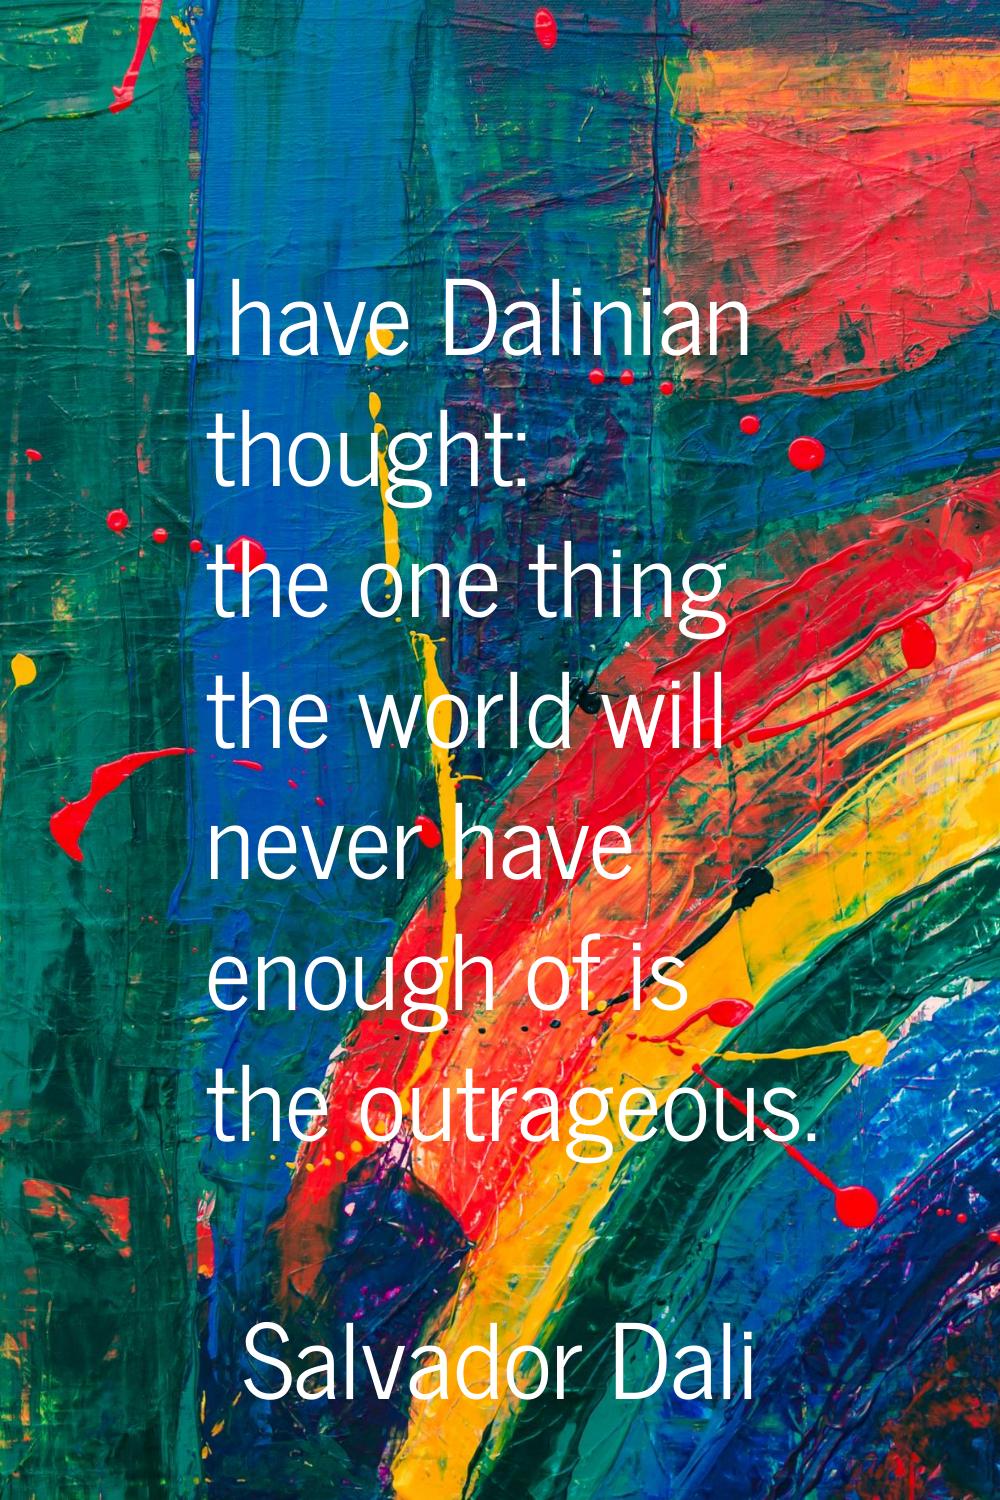 I have Dalinian thought: the one thing the world will never have enough of is the outrageous.